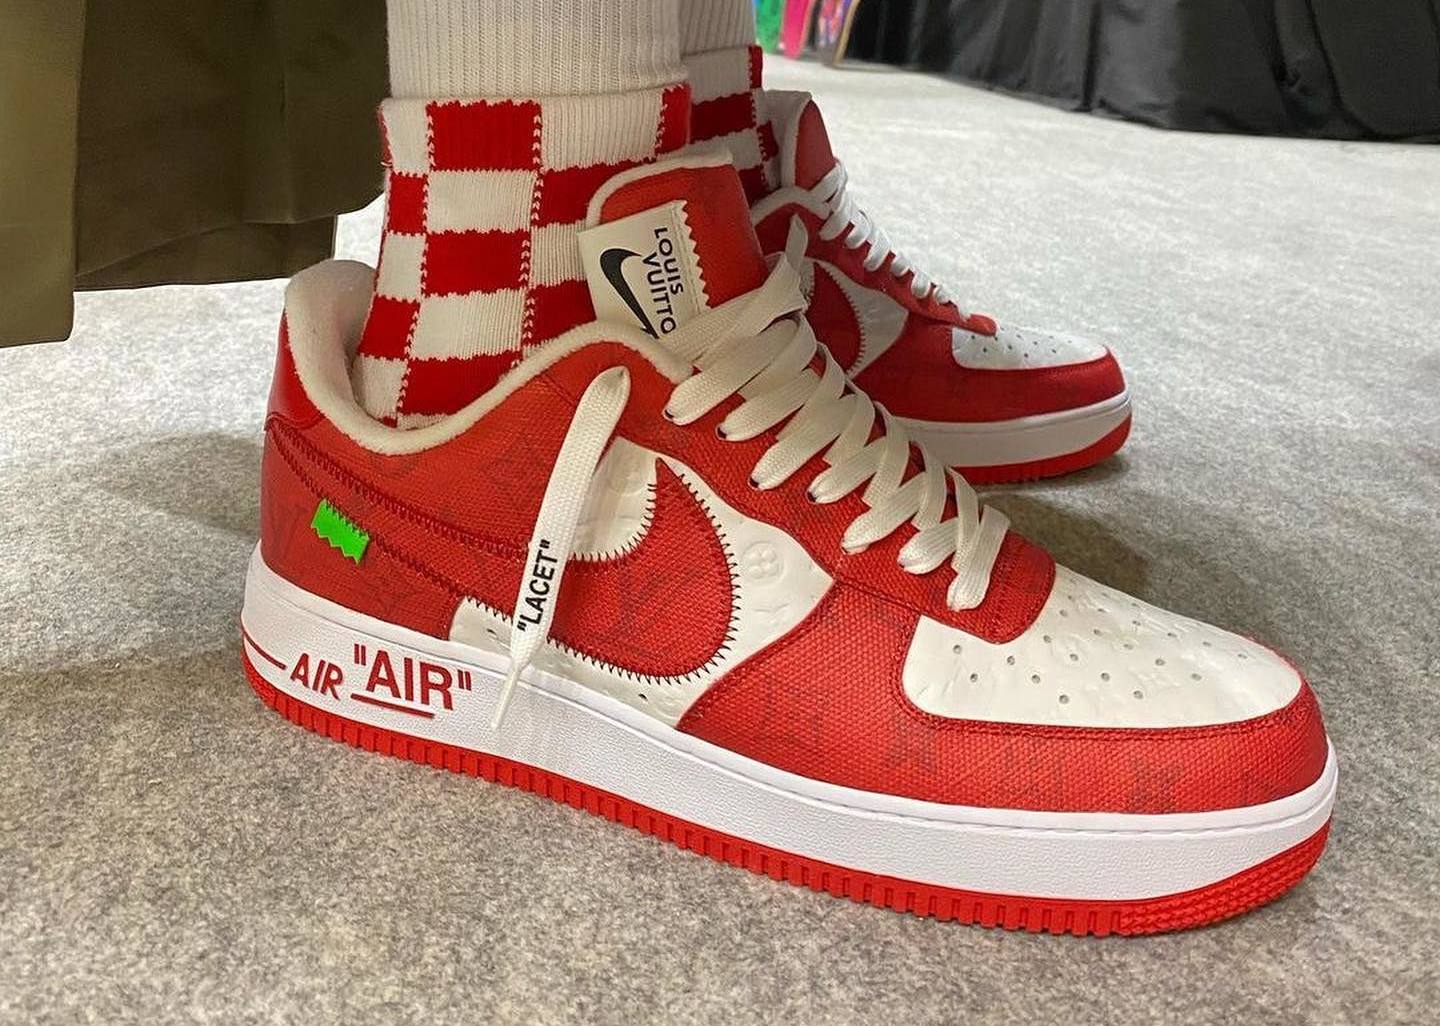 All Eight Louis Vuitton Nike Air Force 1 F&F Colorways